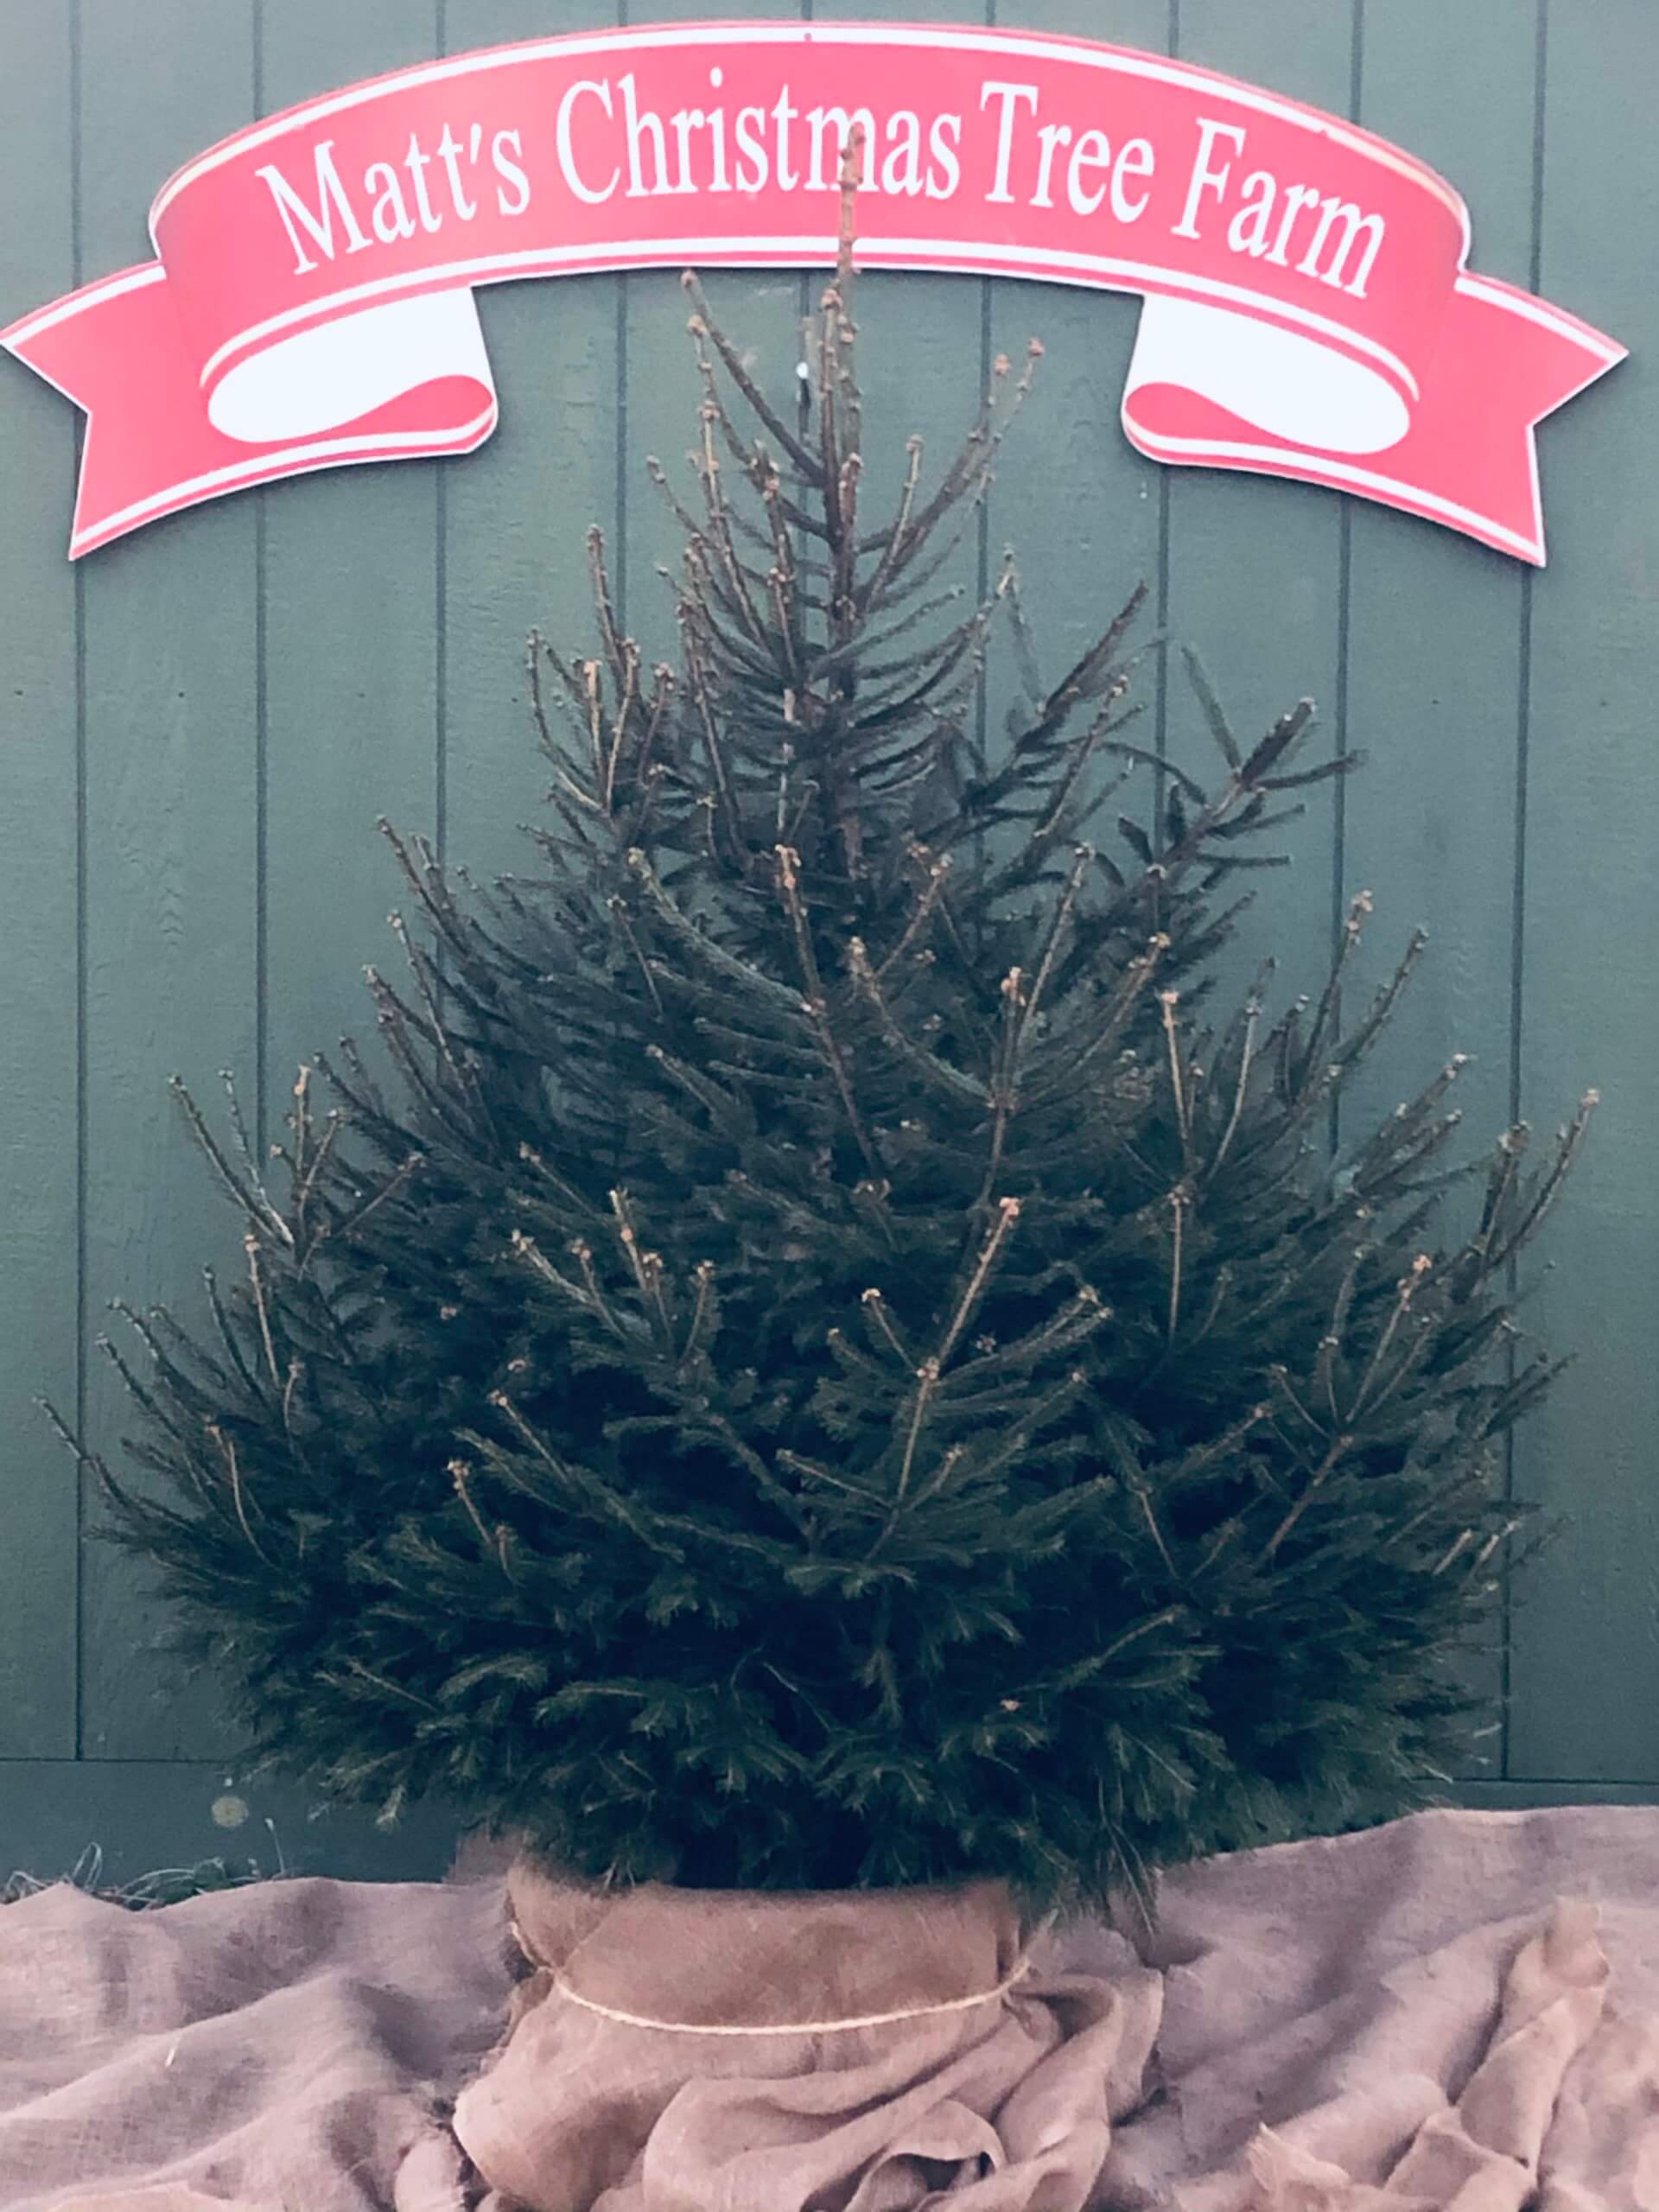 Where To Buy A Live Christmas Tree With Root Ball?